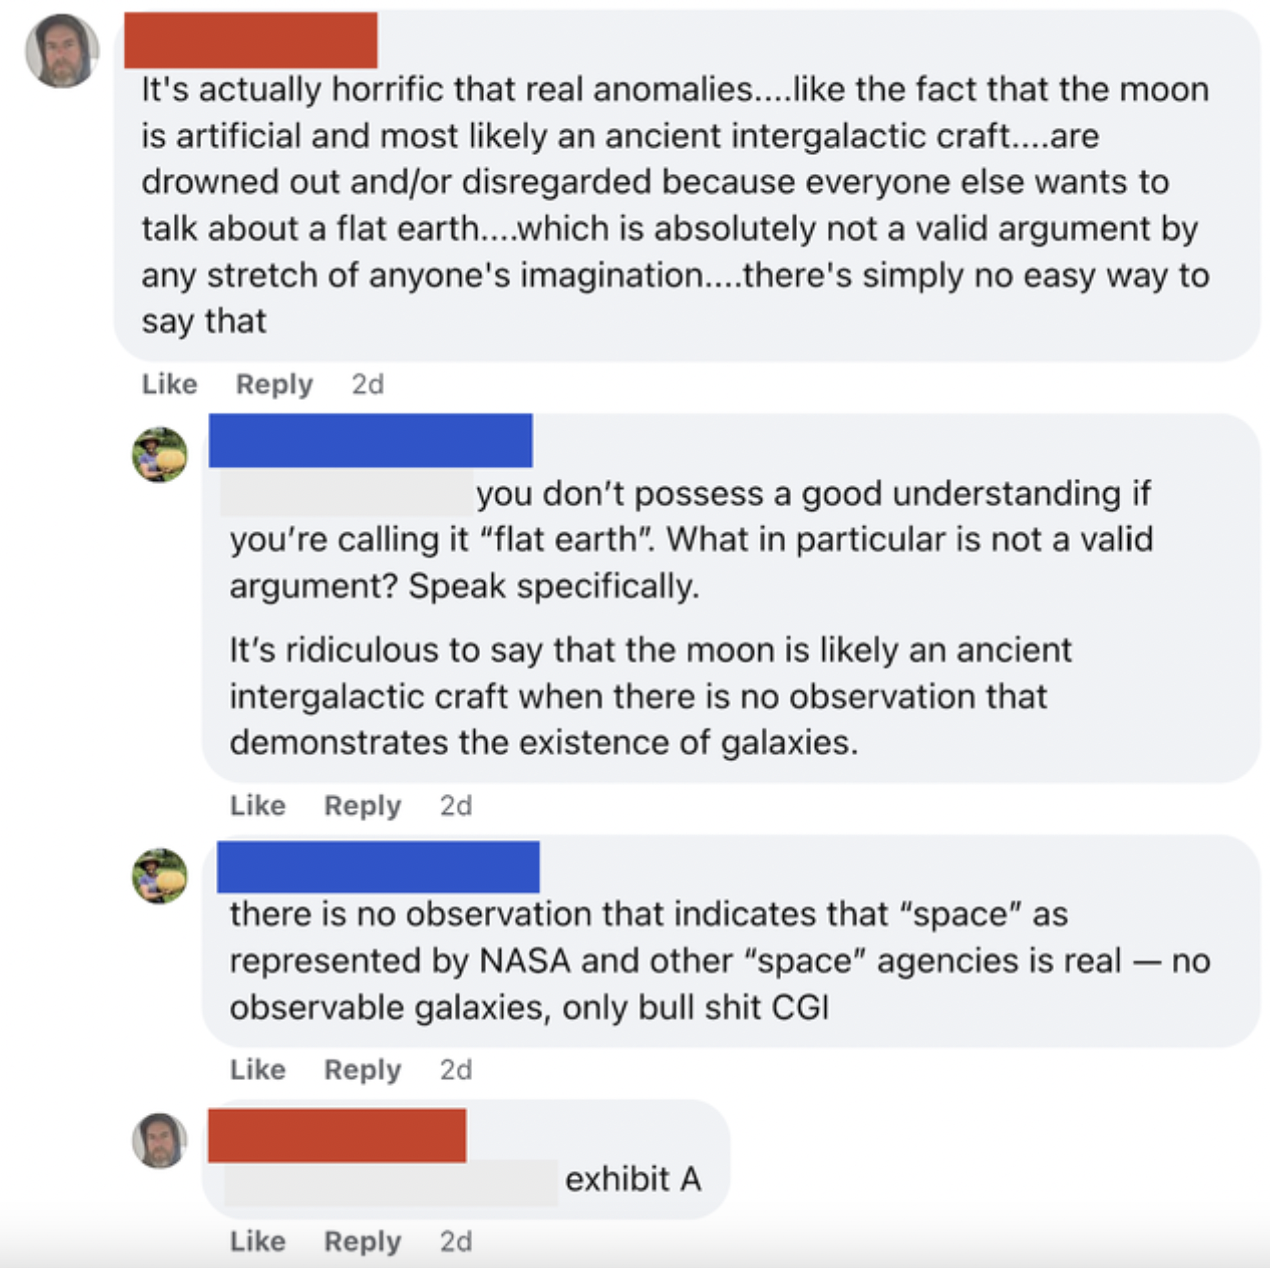 Confidently incorrect people - web page - It's actually horrific that real anomalies.... the fact that the moon is artificial and most ly an ancient intergalactic craft....are drowned out andor disregarded because everyone else wants to talk about a flat